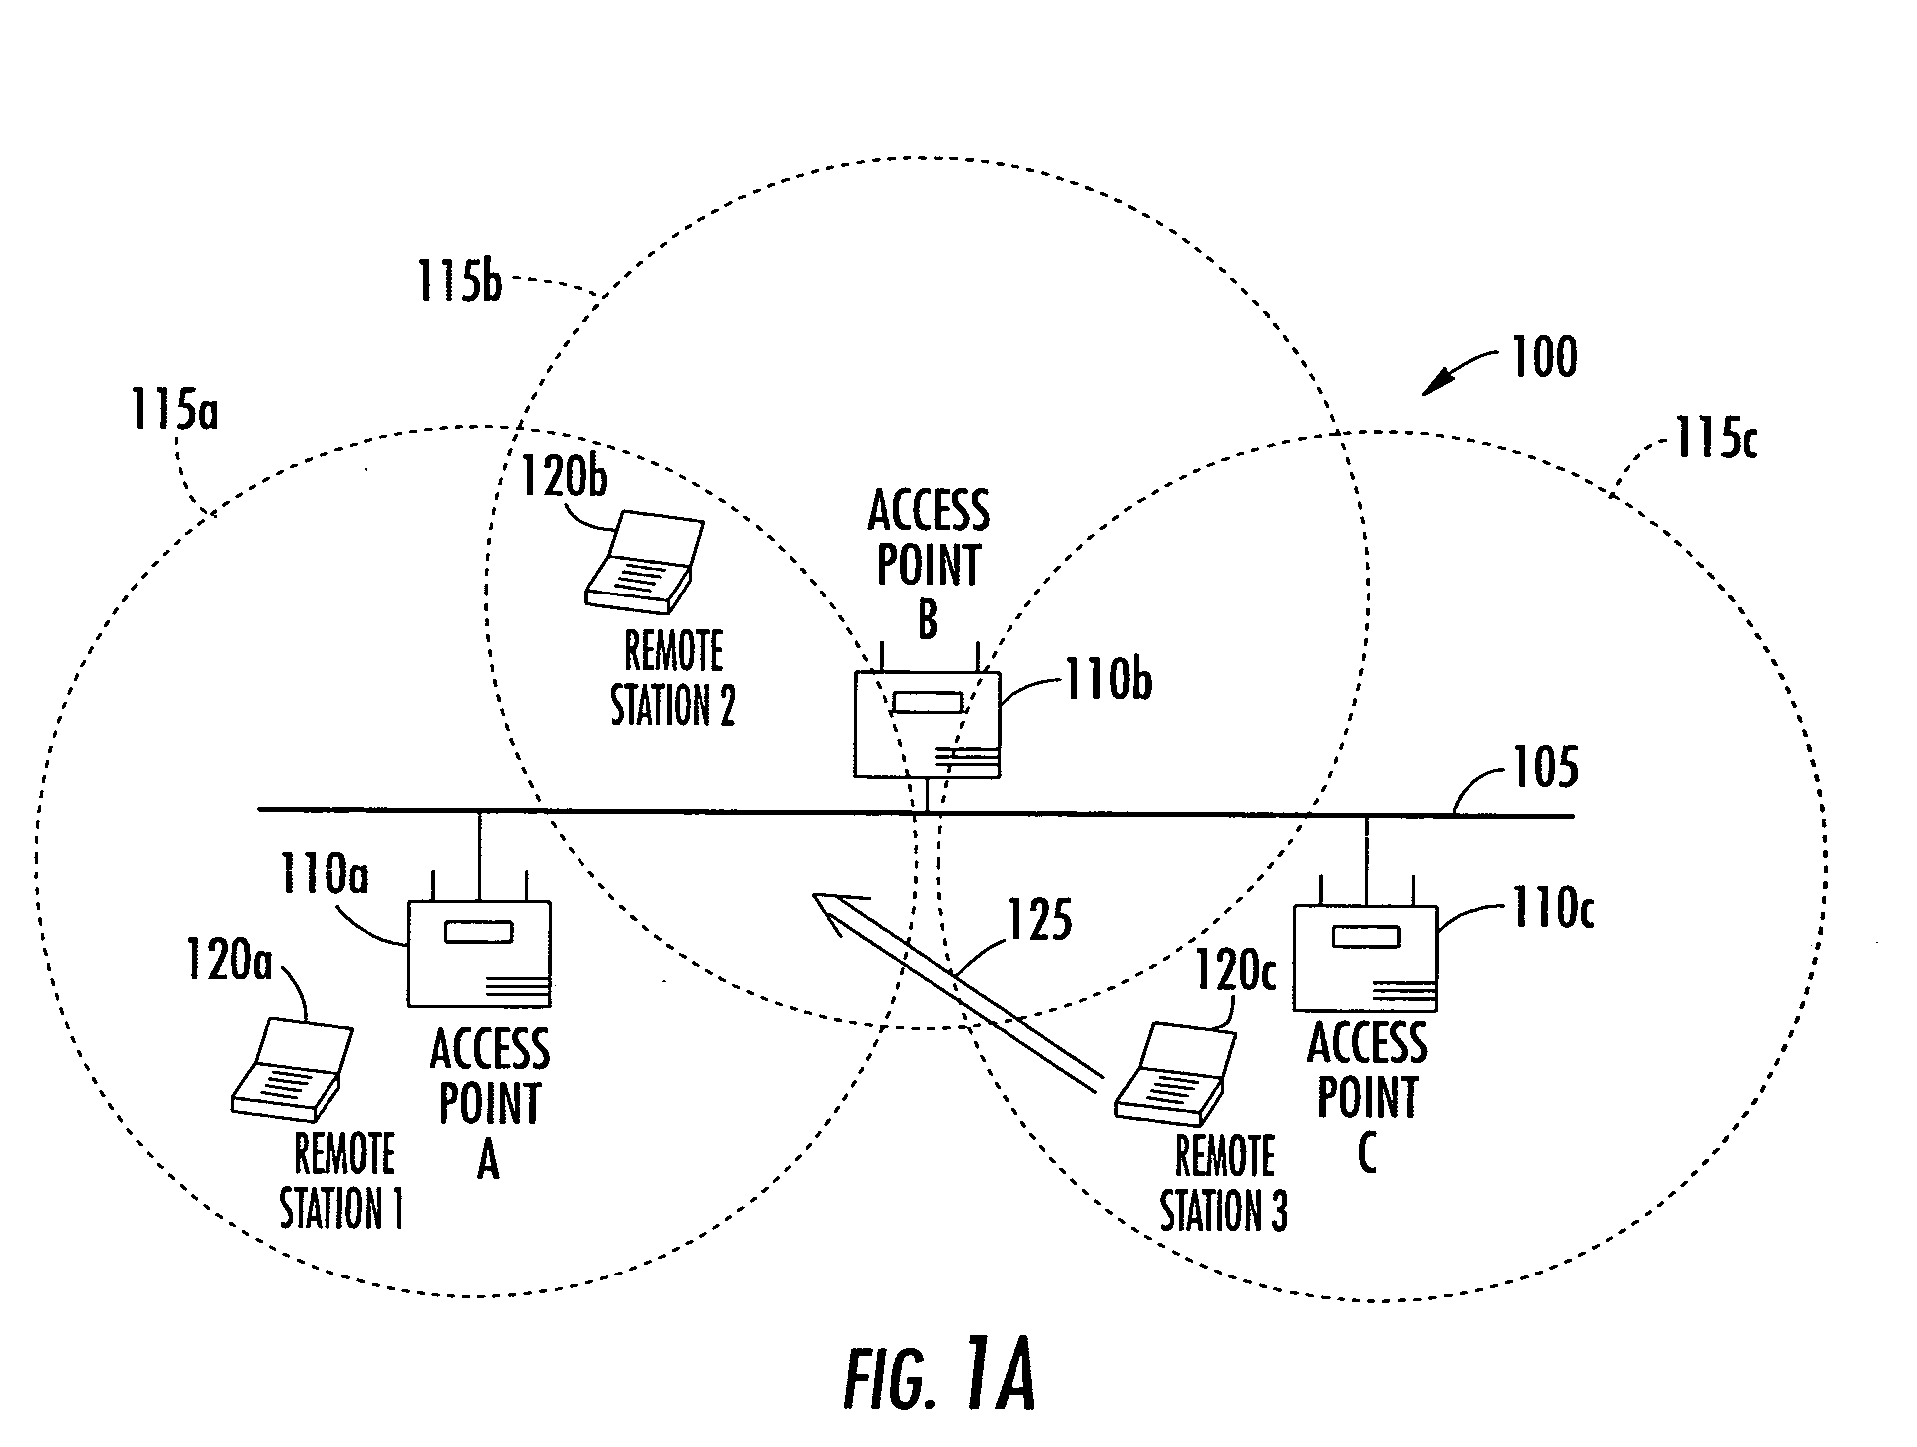 Antenna steering for an access point based upon spatial diversity